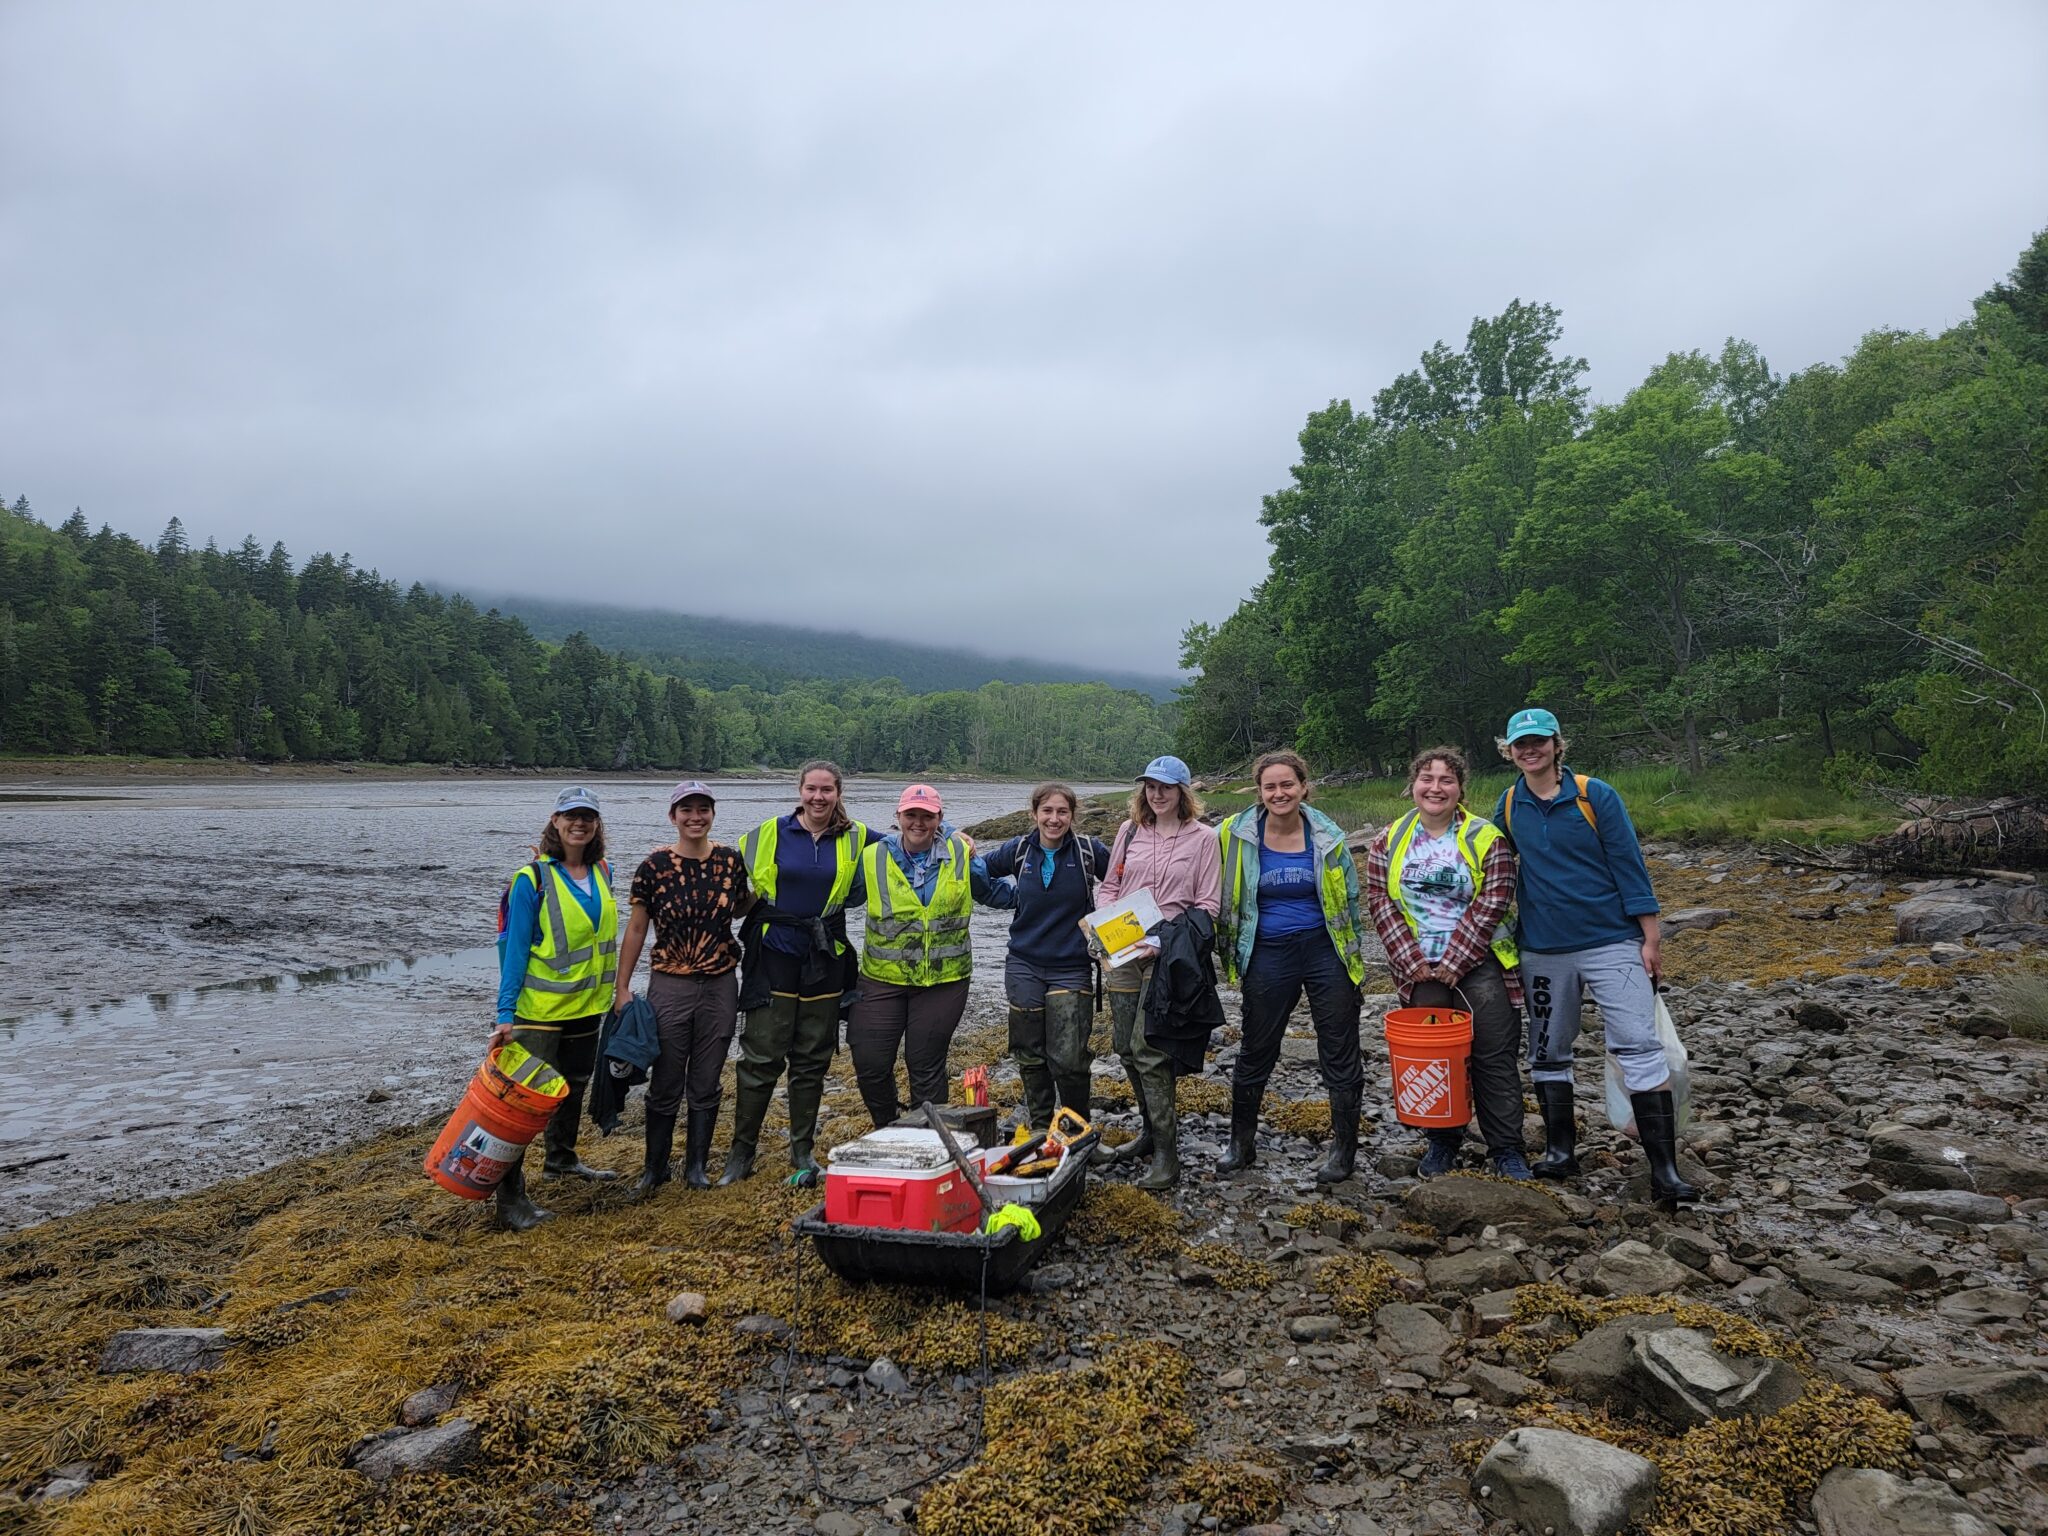 A group of muddy but smiling people pose for a photo in the intertidal zone.